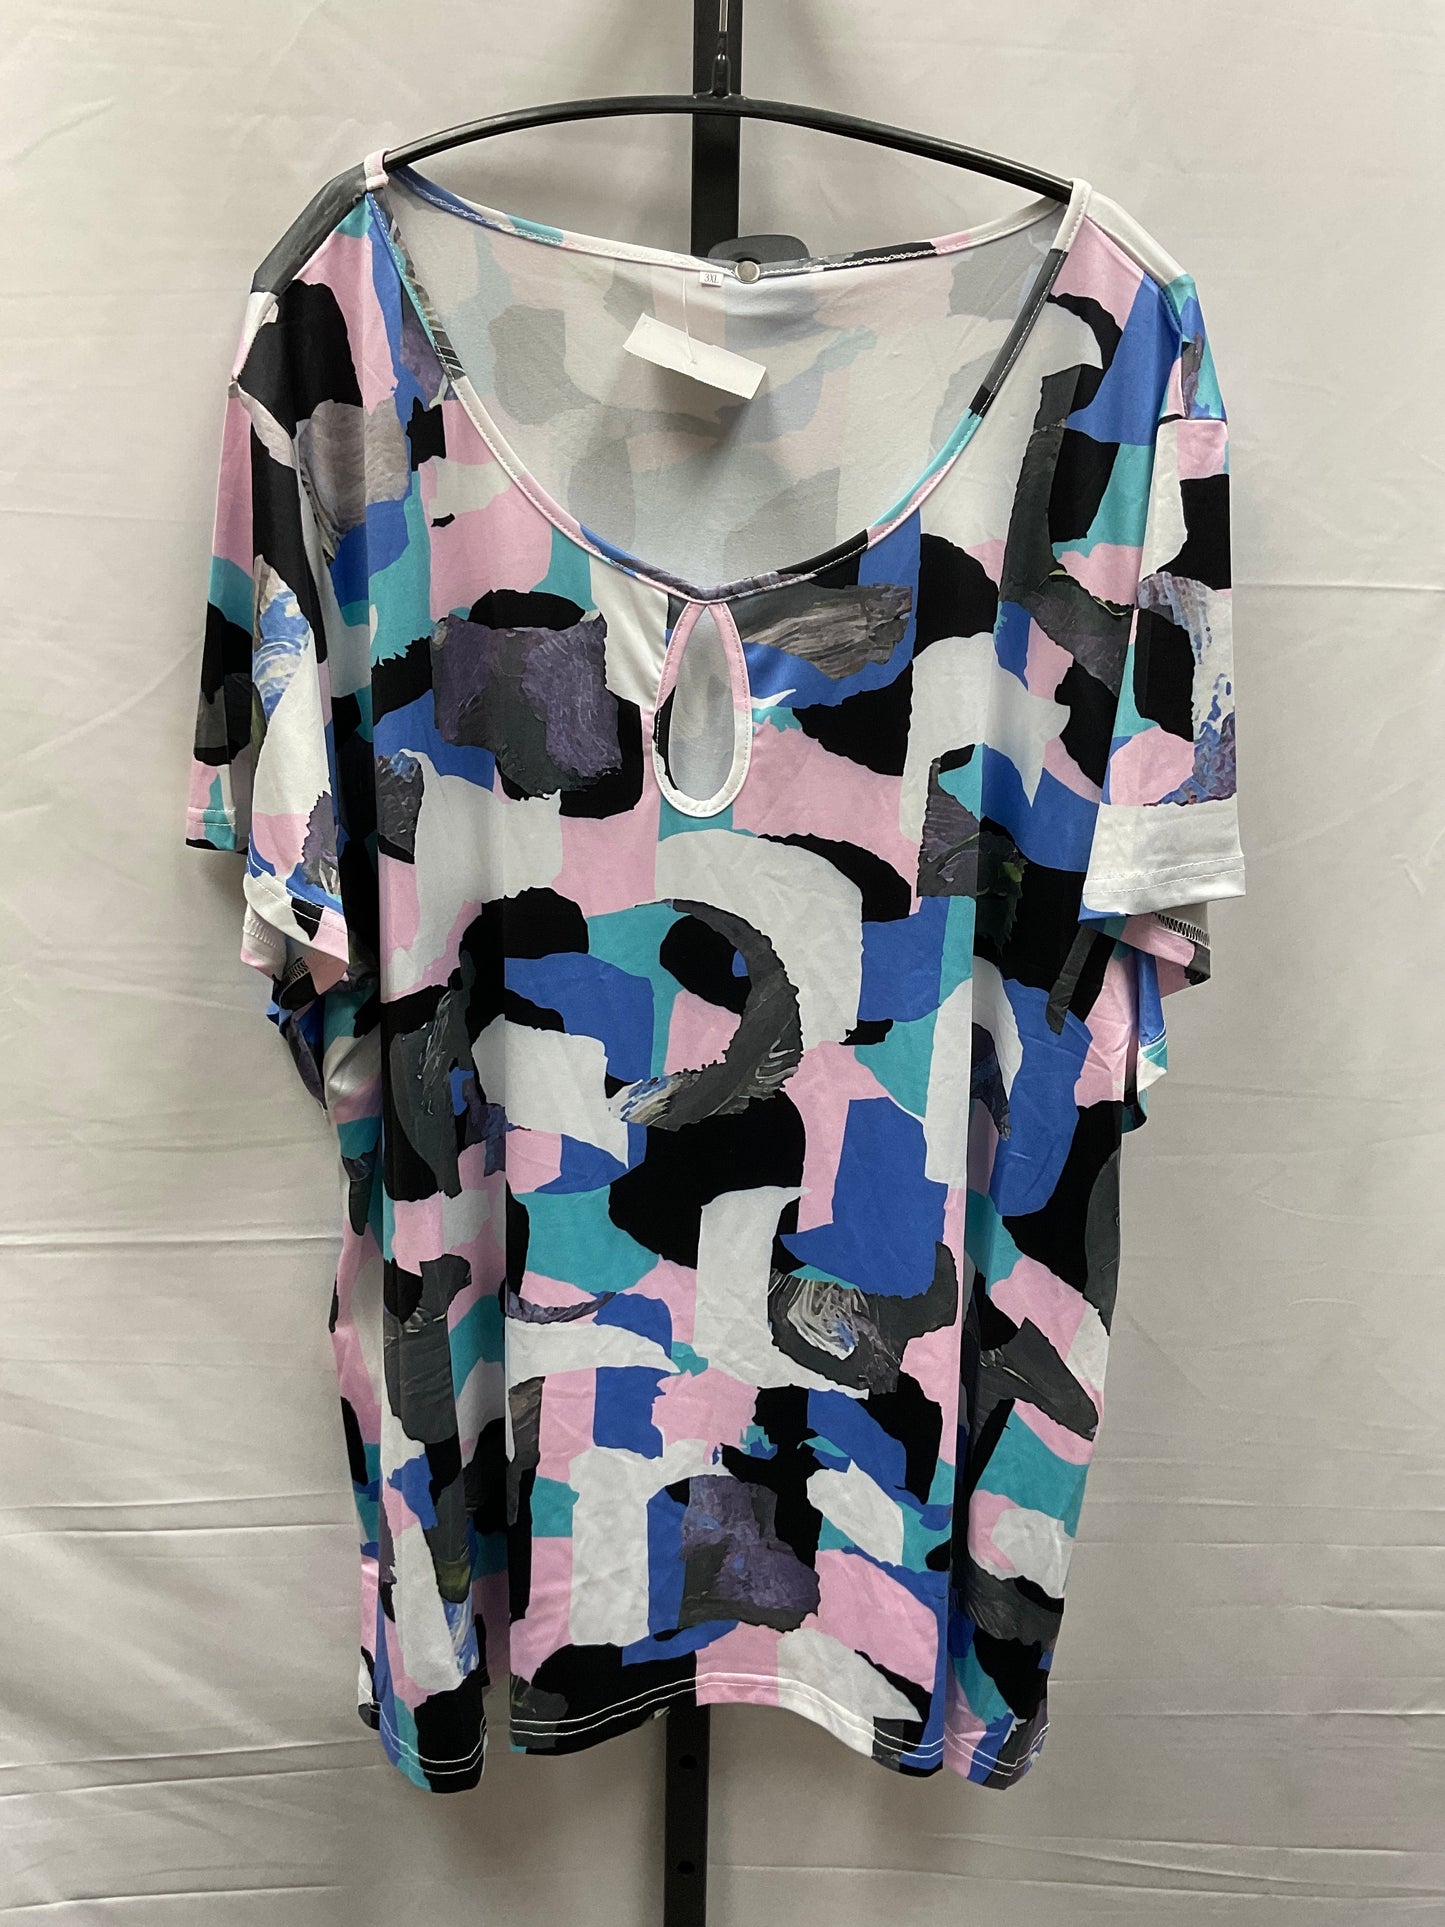 Multi-colored Top Short Sleeve Clothes Mentor, Size 3x